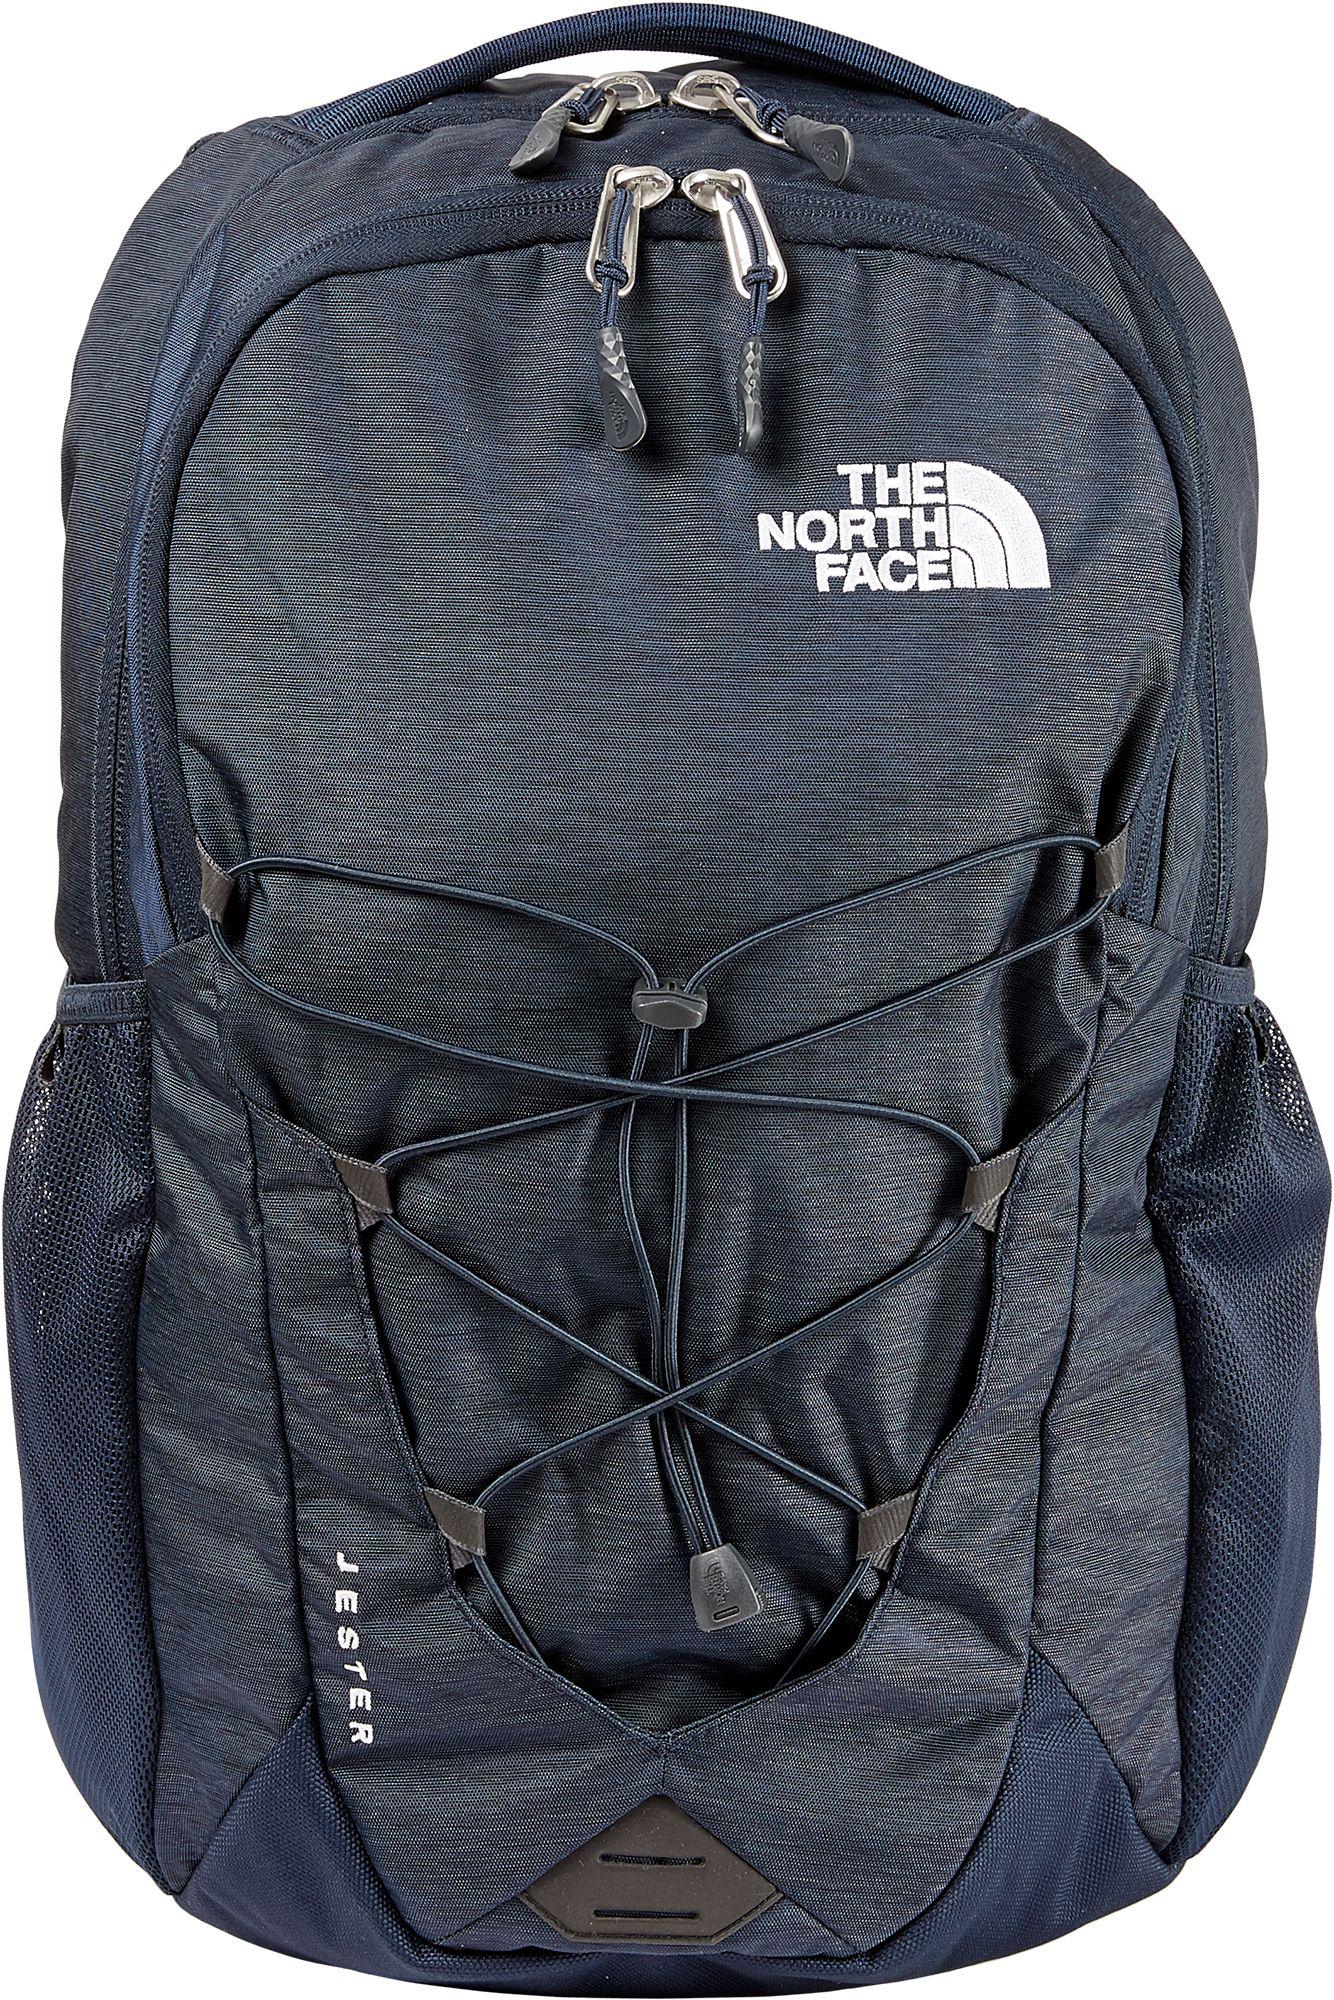 The North Face Jester Backpack in Blue for Men - Lyst